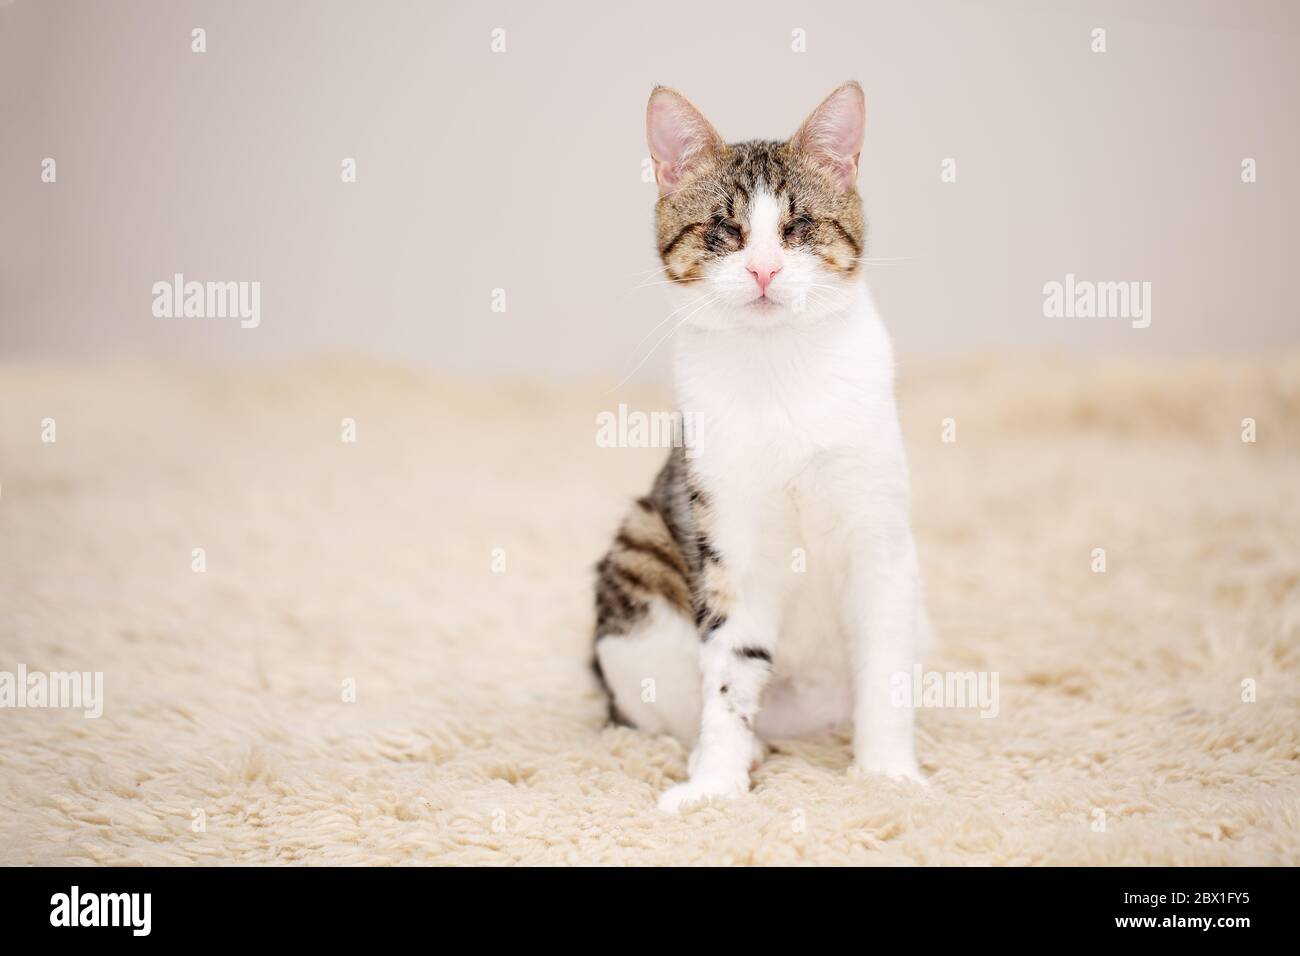 Cute and affectionate, blind, white and brown tabby kitty sitting on a beige fleecy rug, lost its eyes due to a severe Feline Herpses Virus Infection Stock Photo